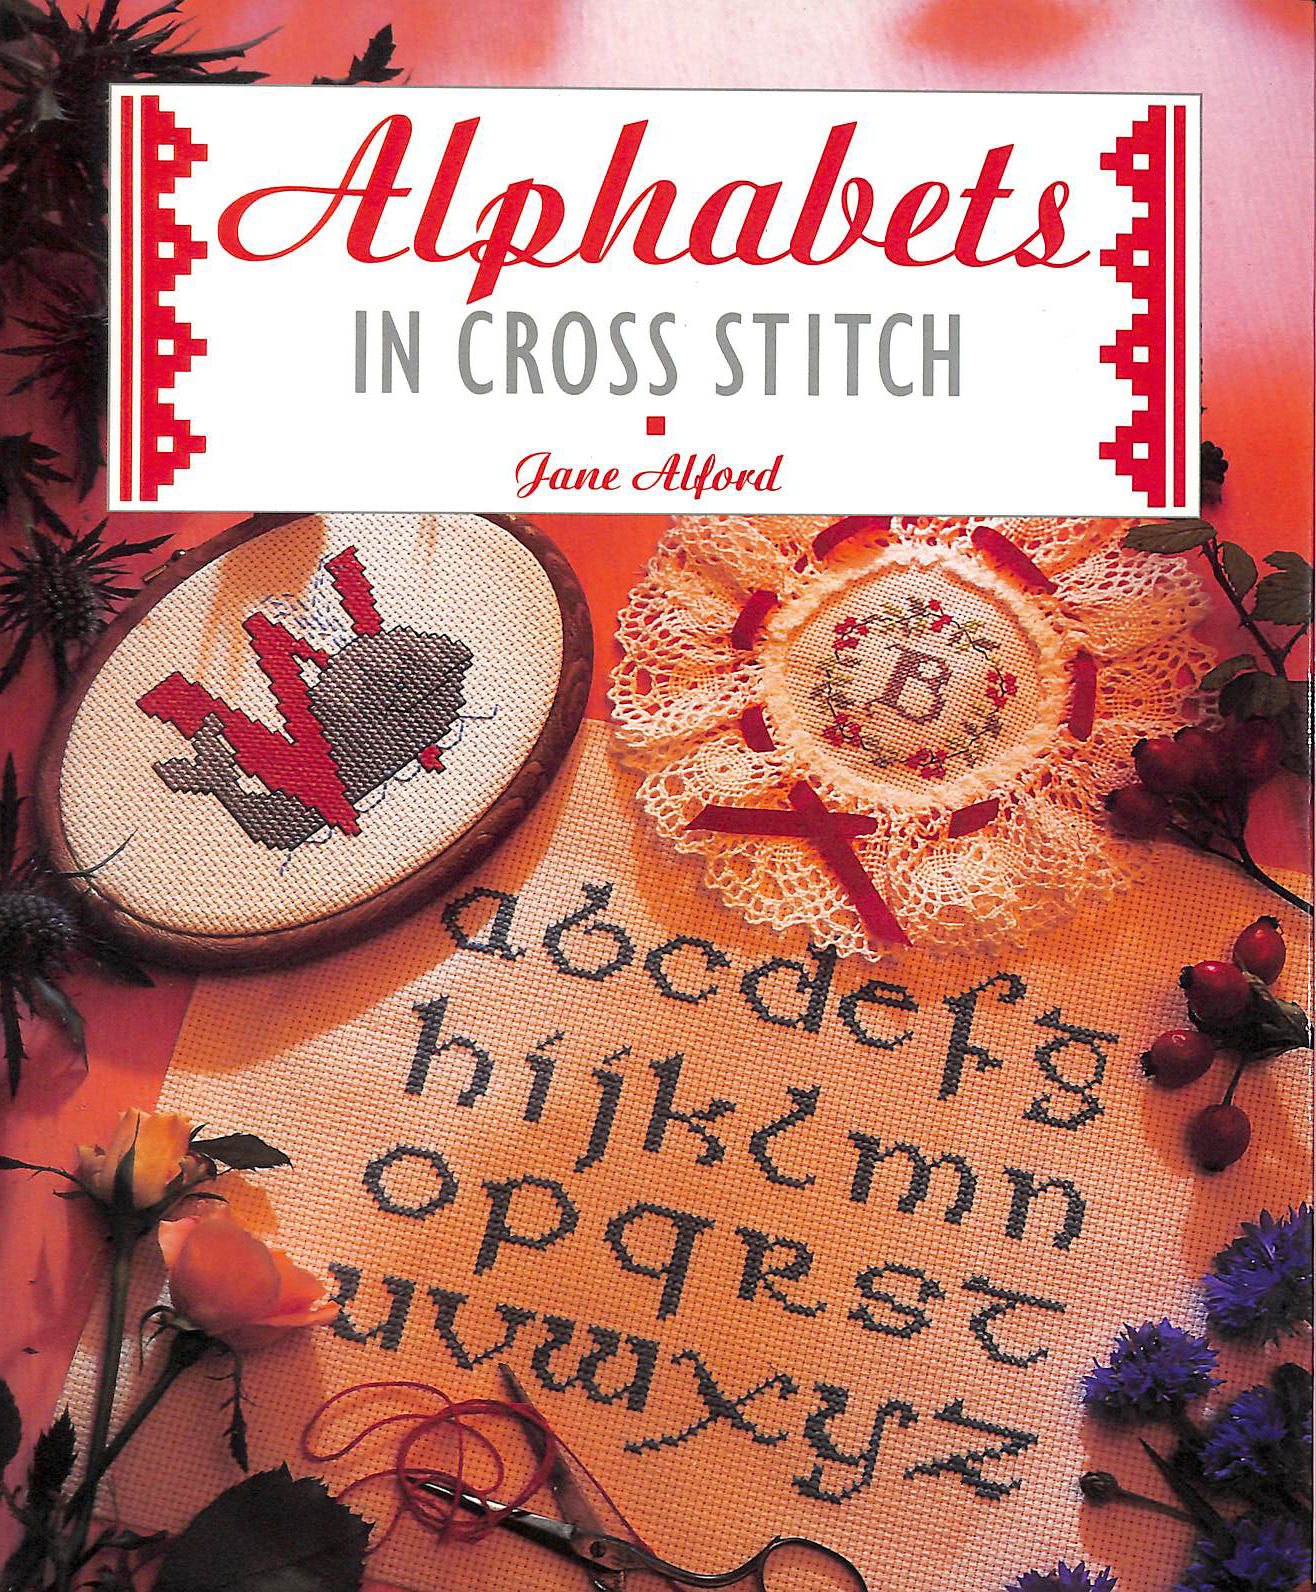 ALFORD, JANE - Alphabets in Cross Stitch (Cross Stitch Collection)